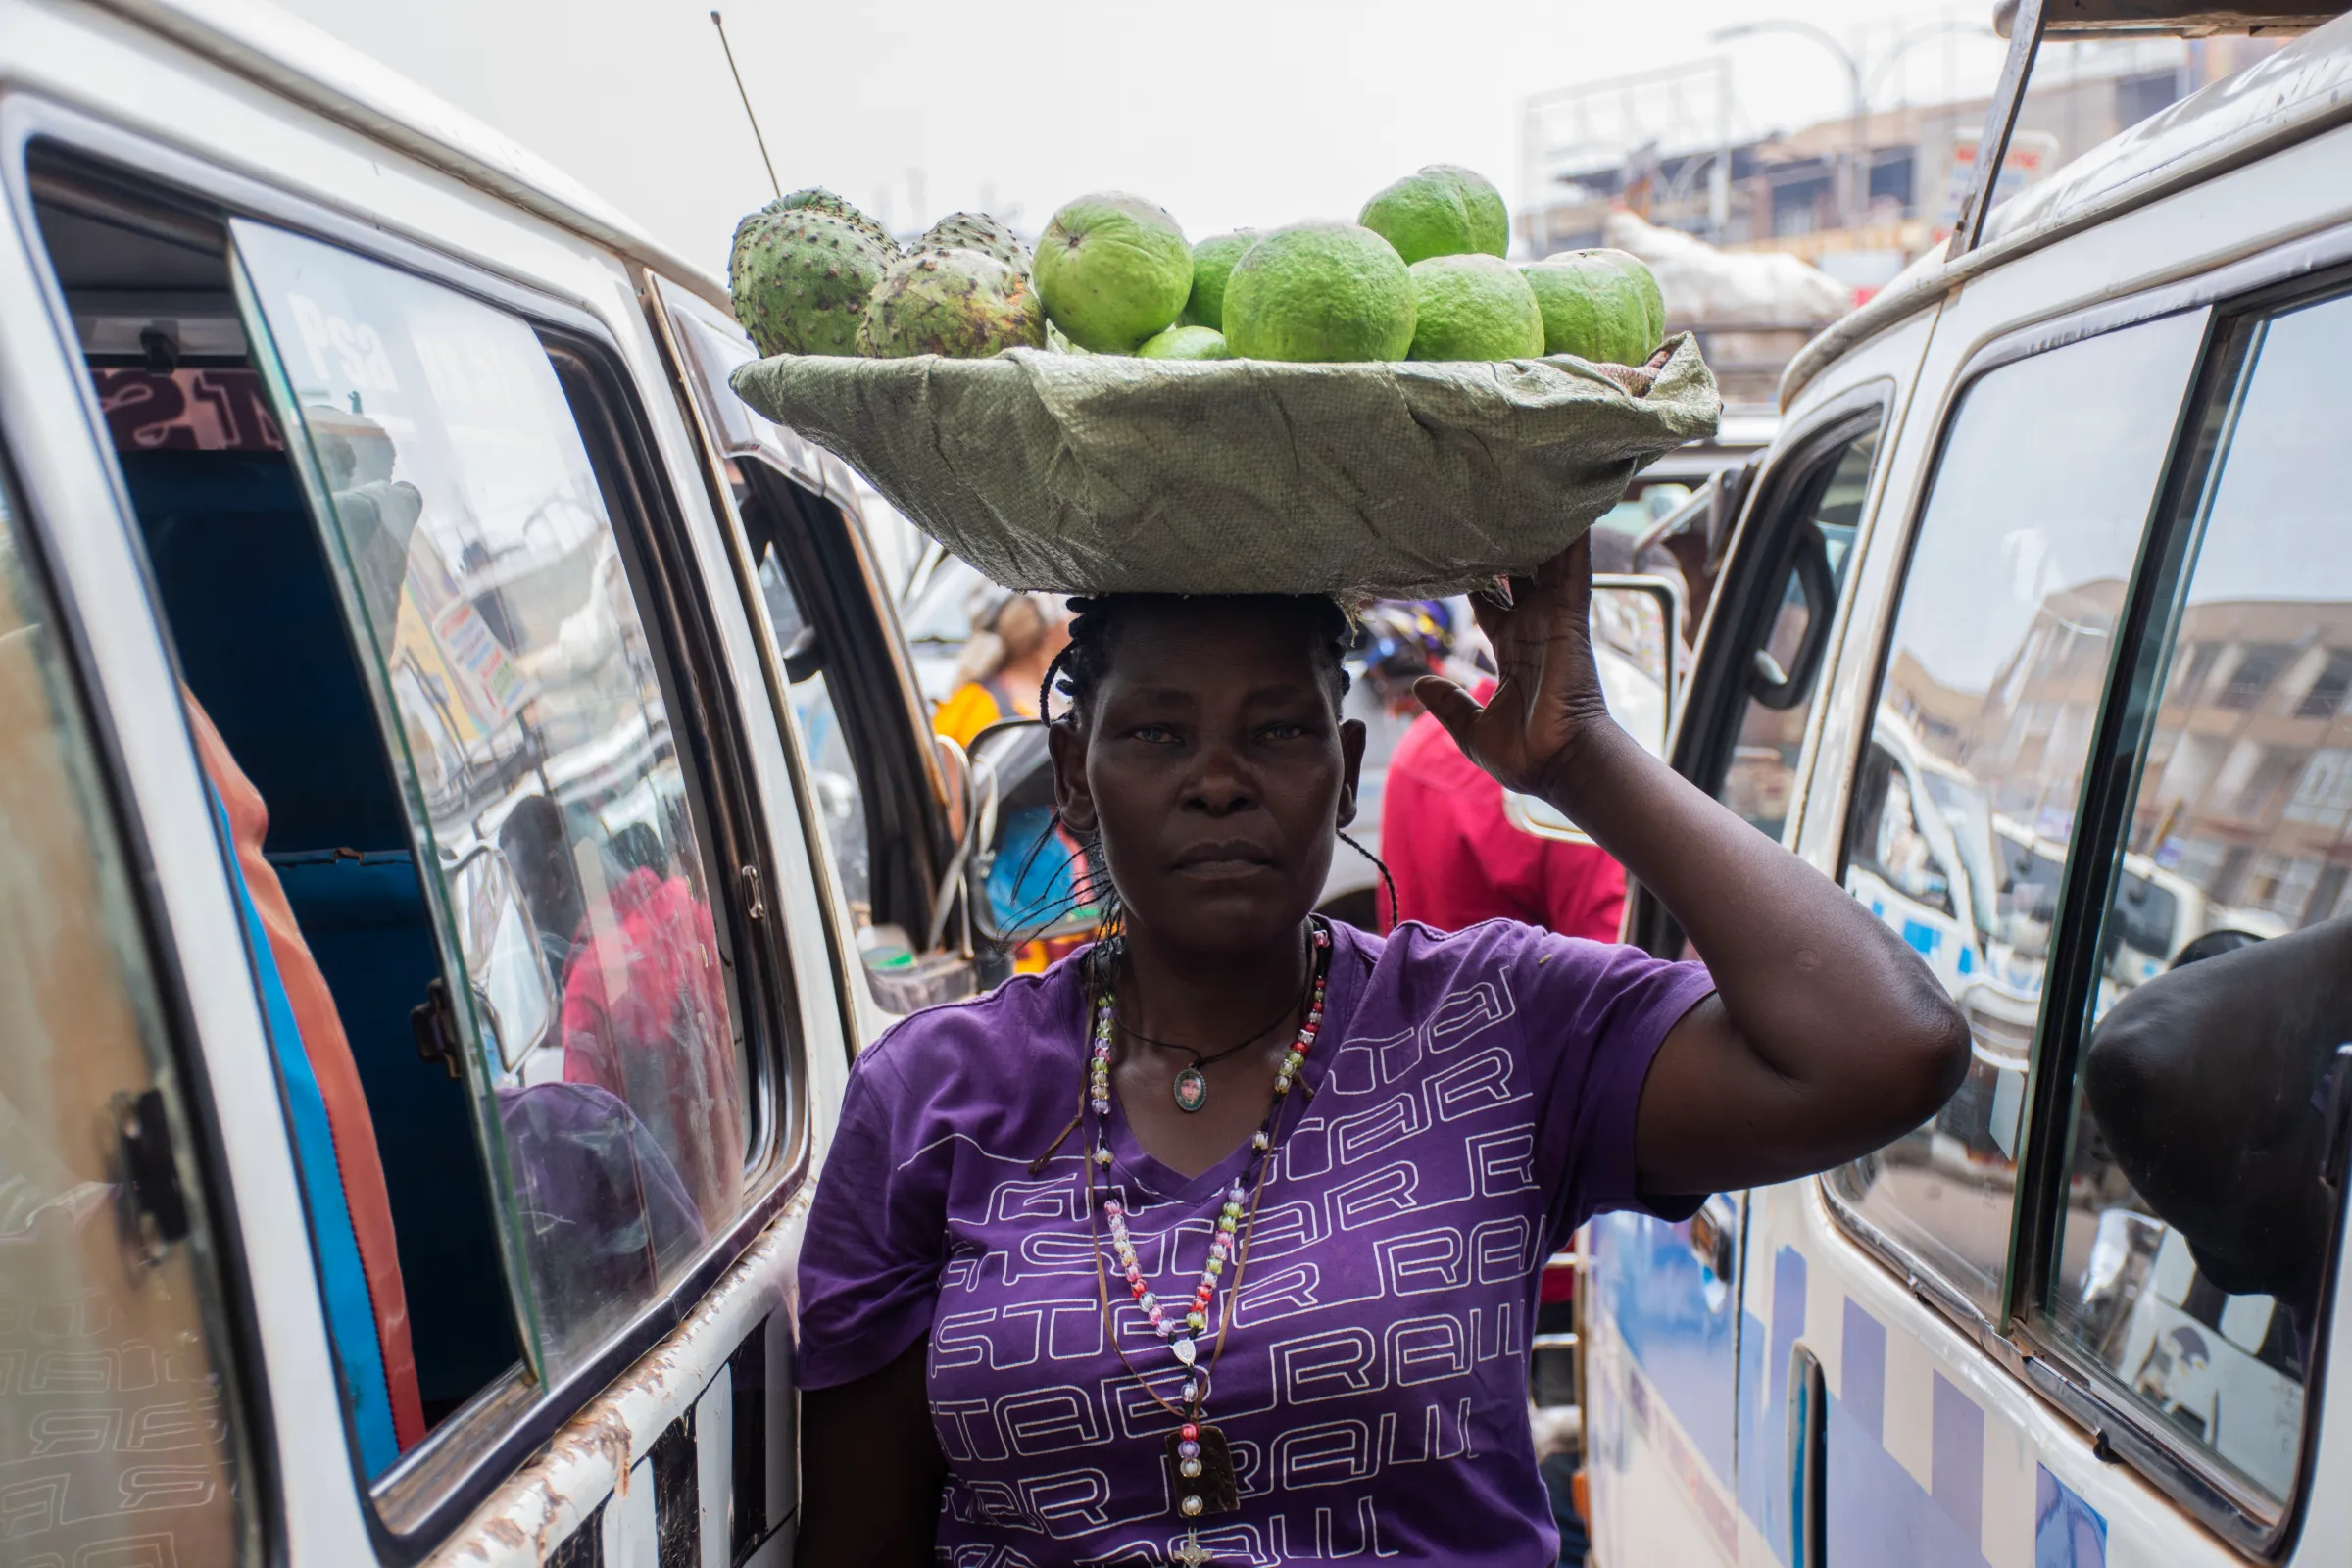 A woman stand between two vehicles, posing for a photo with a basket of fruit resting on her head